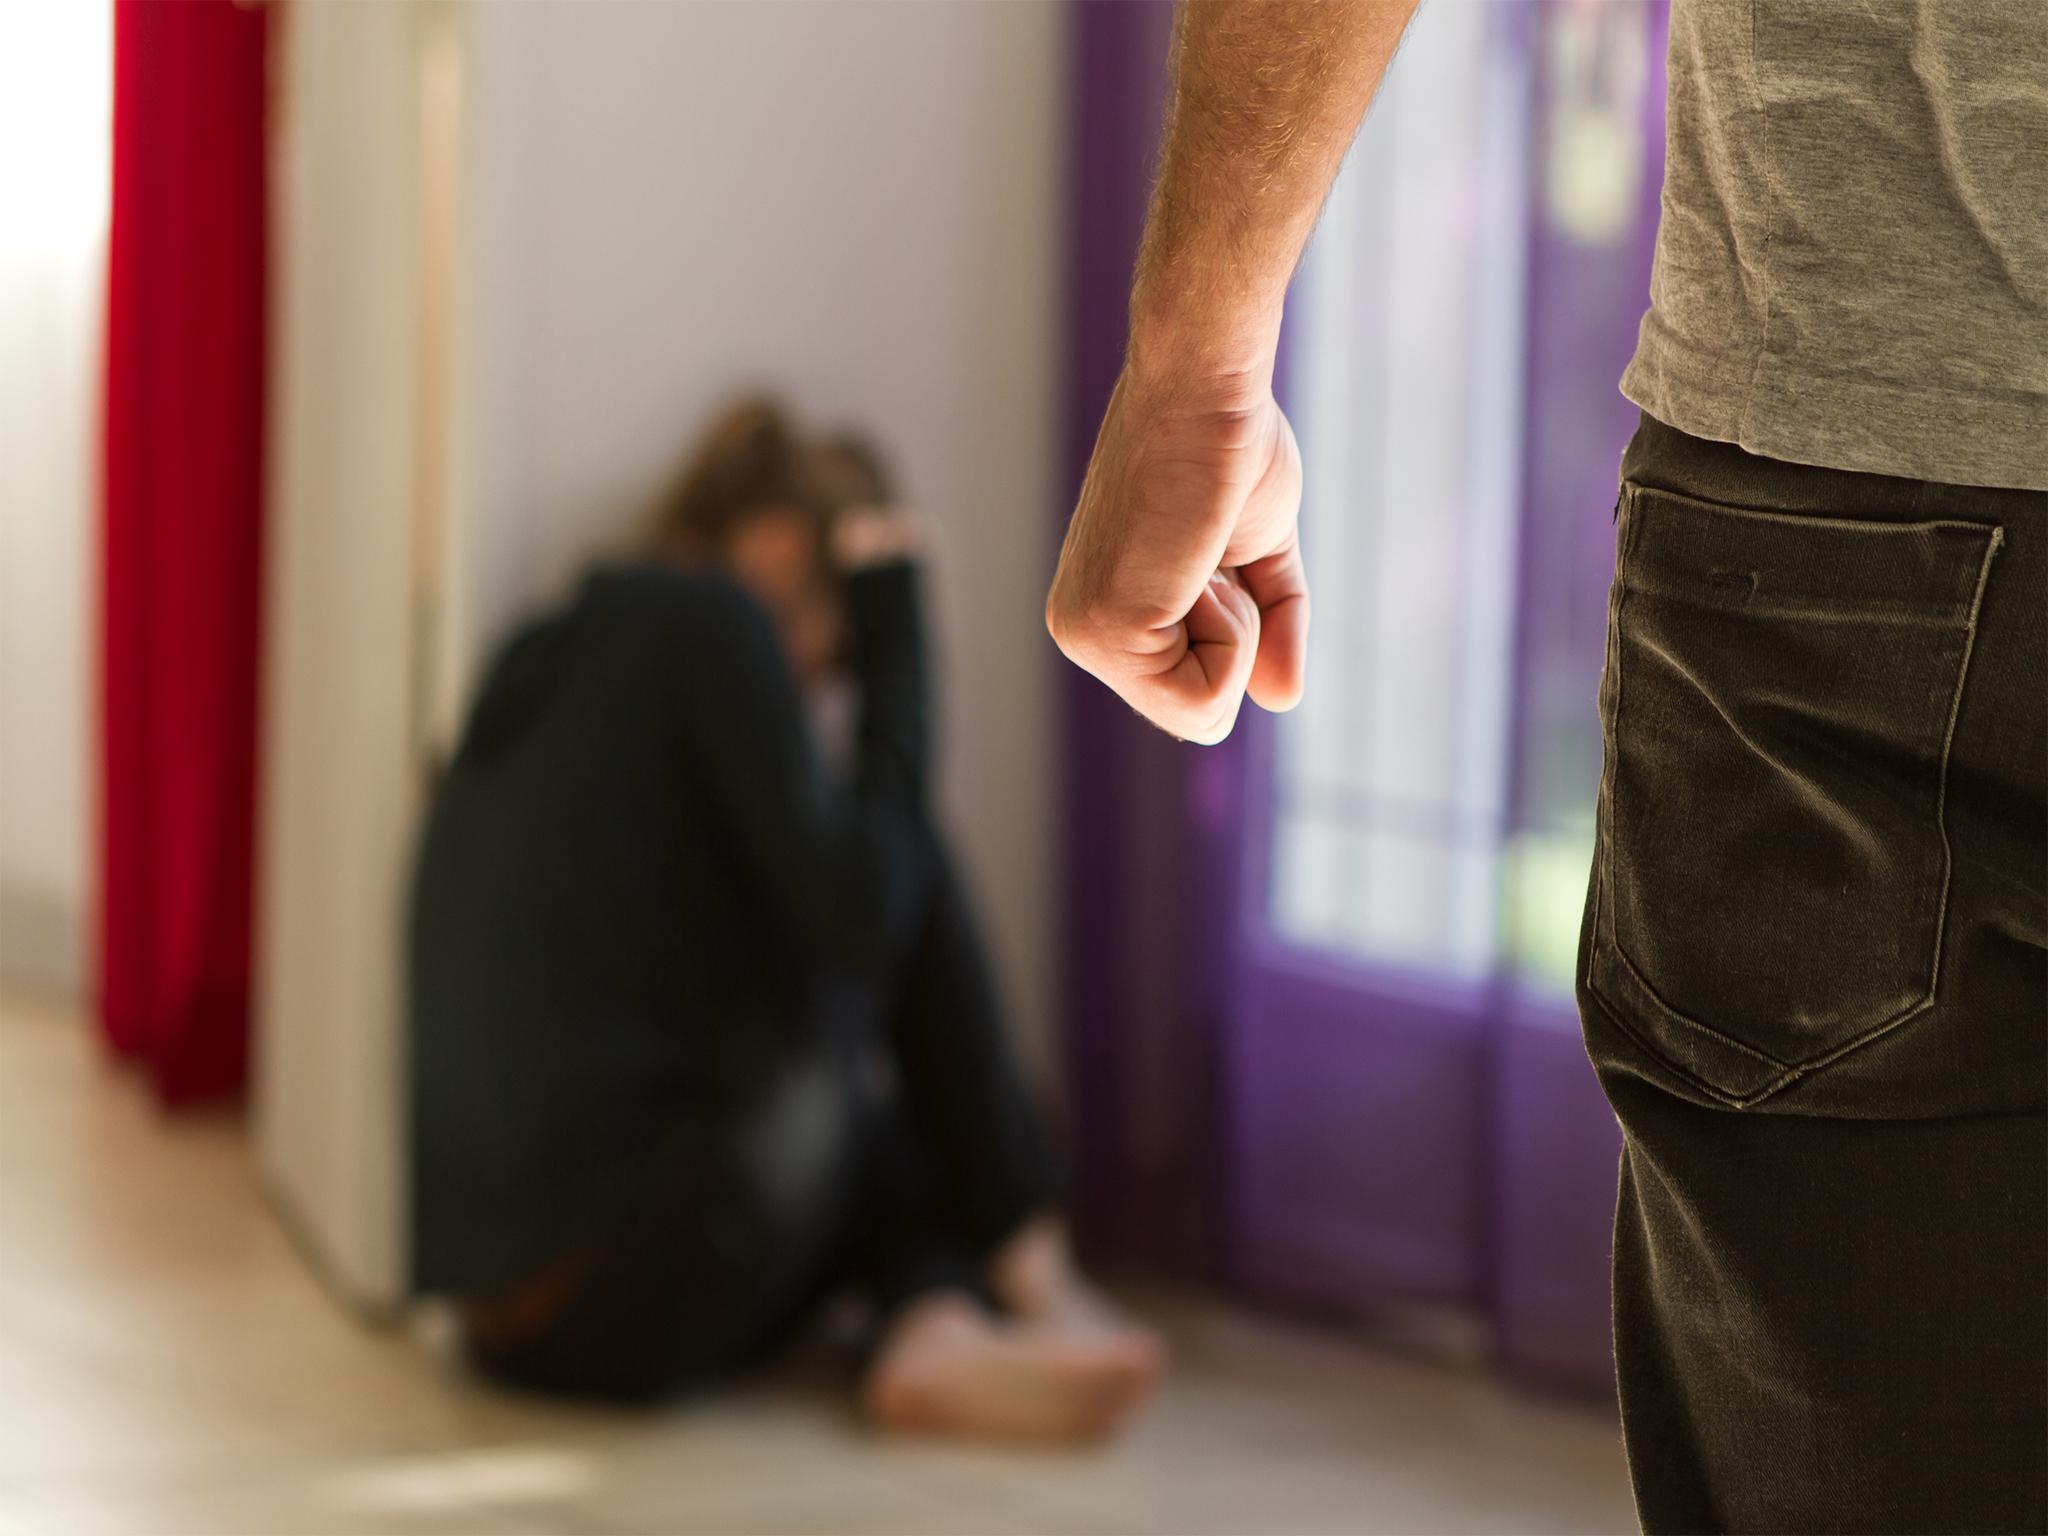 An estimated 2 million adults aged 16 to 59 experienced domestic abuse in 2016, according to the ONS